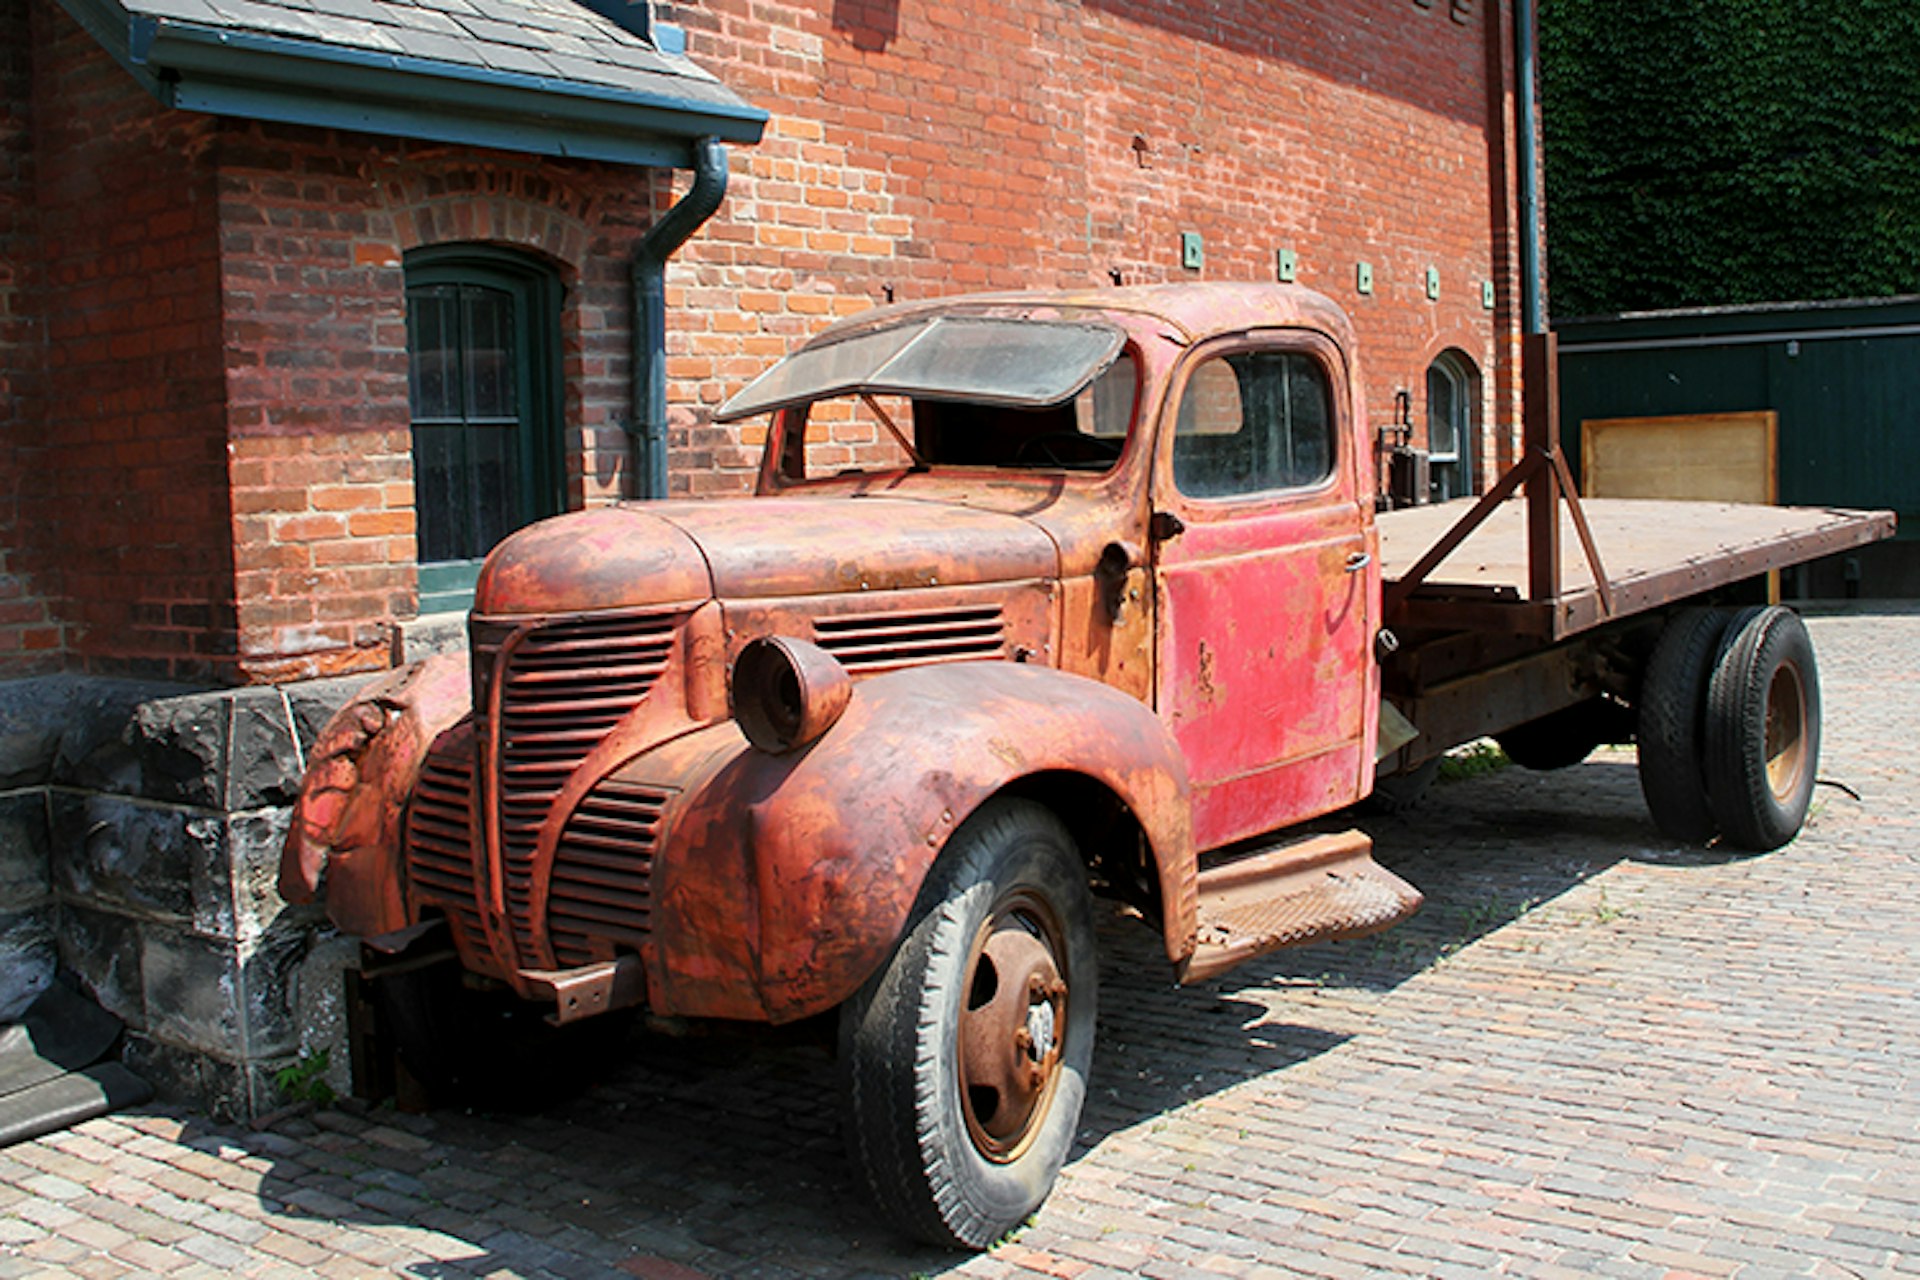 An old flatbed at the Distillery District. Image by David / CC BY 2.0